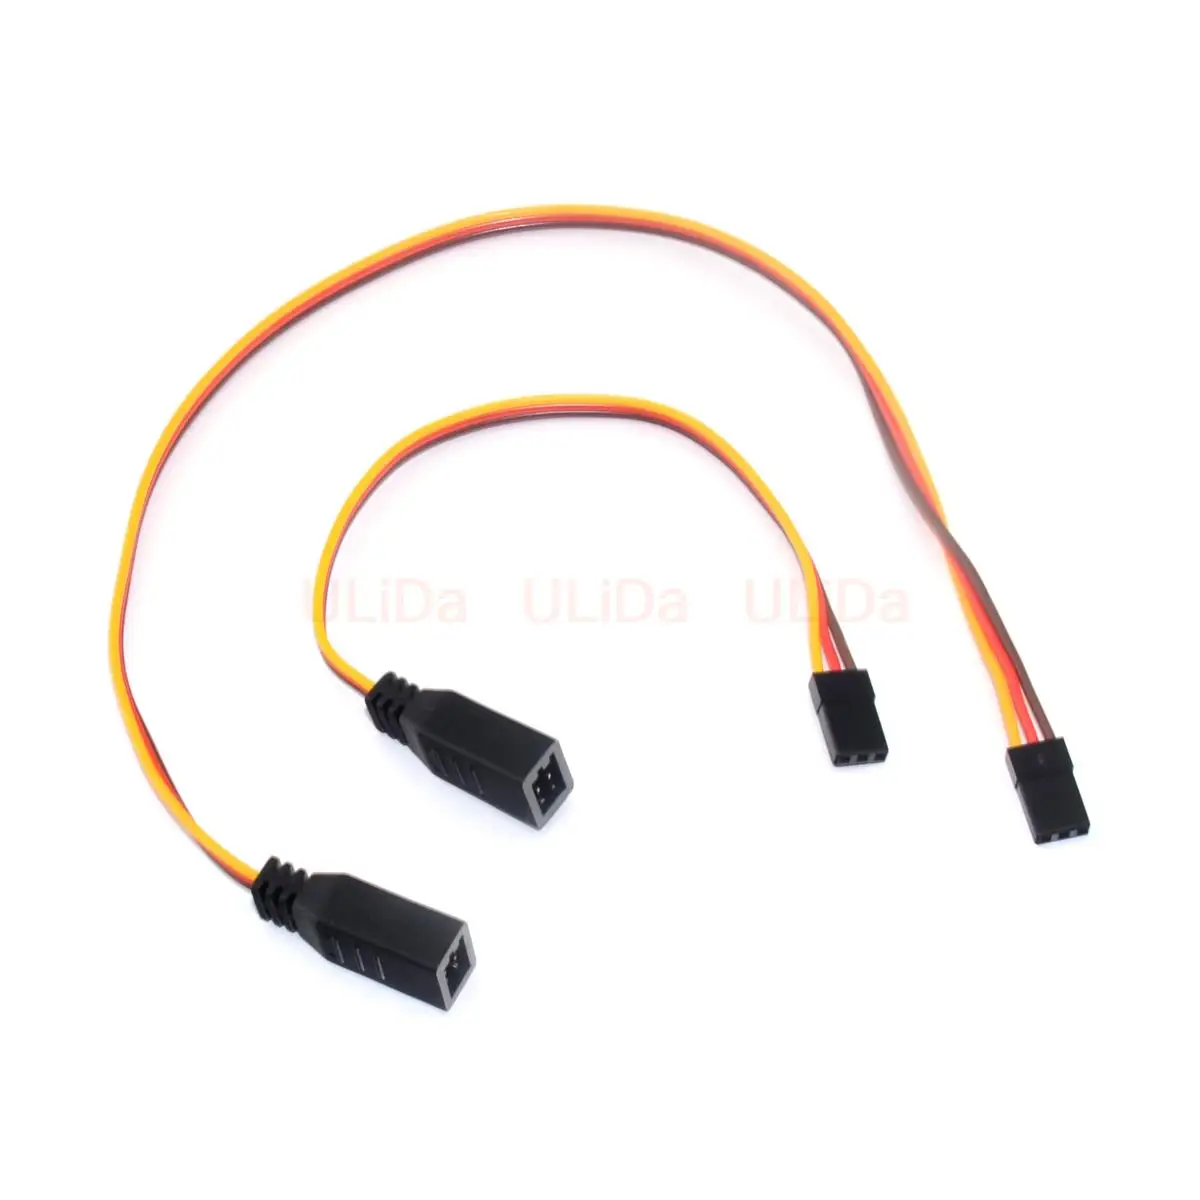 

RC Servo LED Light 1 To 2 Y Extension Cable 2in1 Adapter Wire For Futaba JR RC Model Airplane Helicopter Car Boat Heli DIY